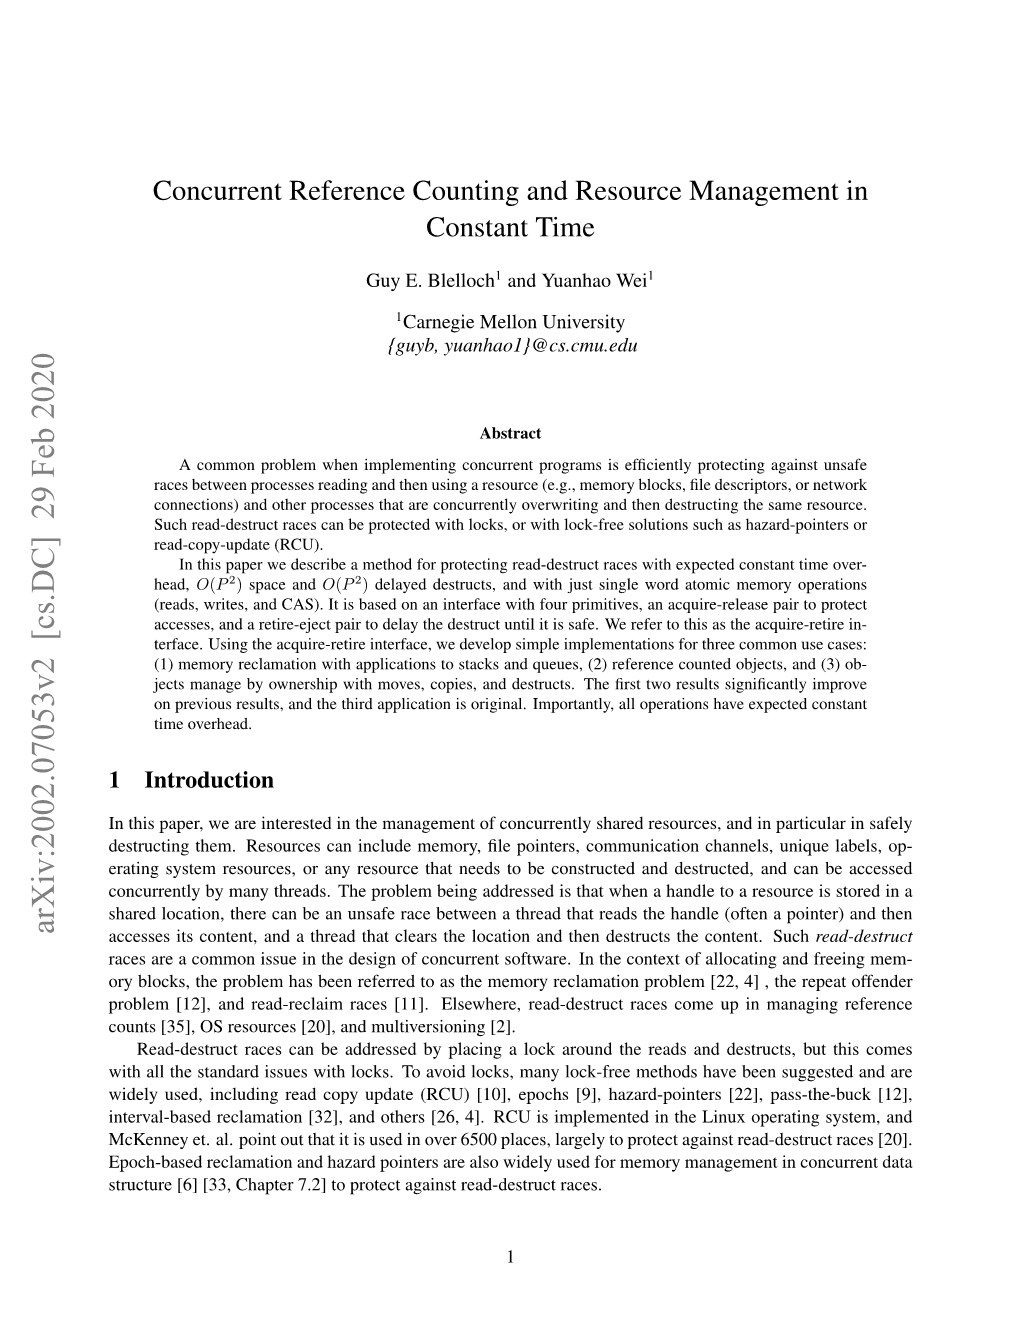 Concurrent Reference Counting and Resource Management in Constant Time